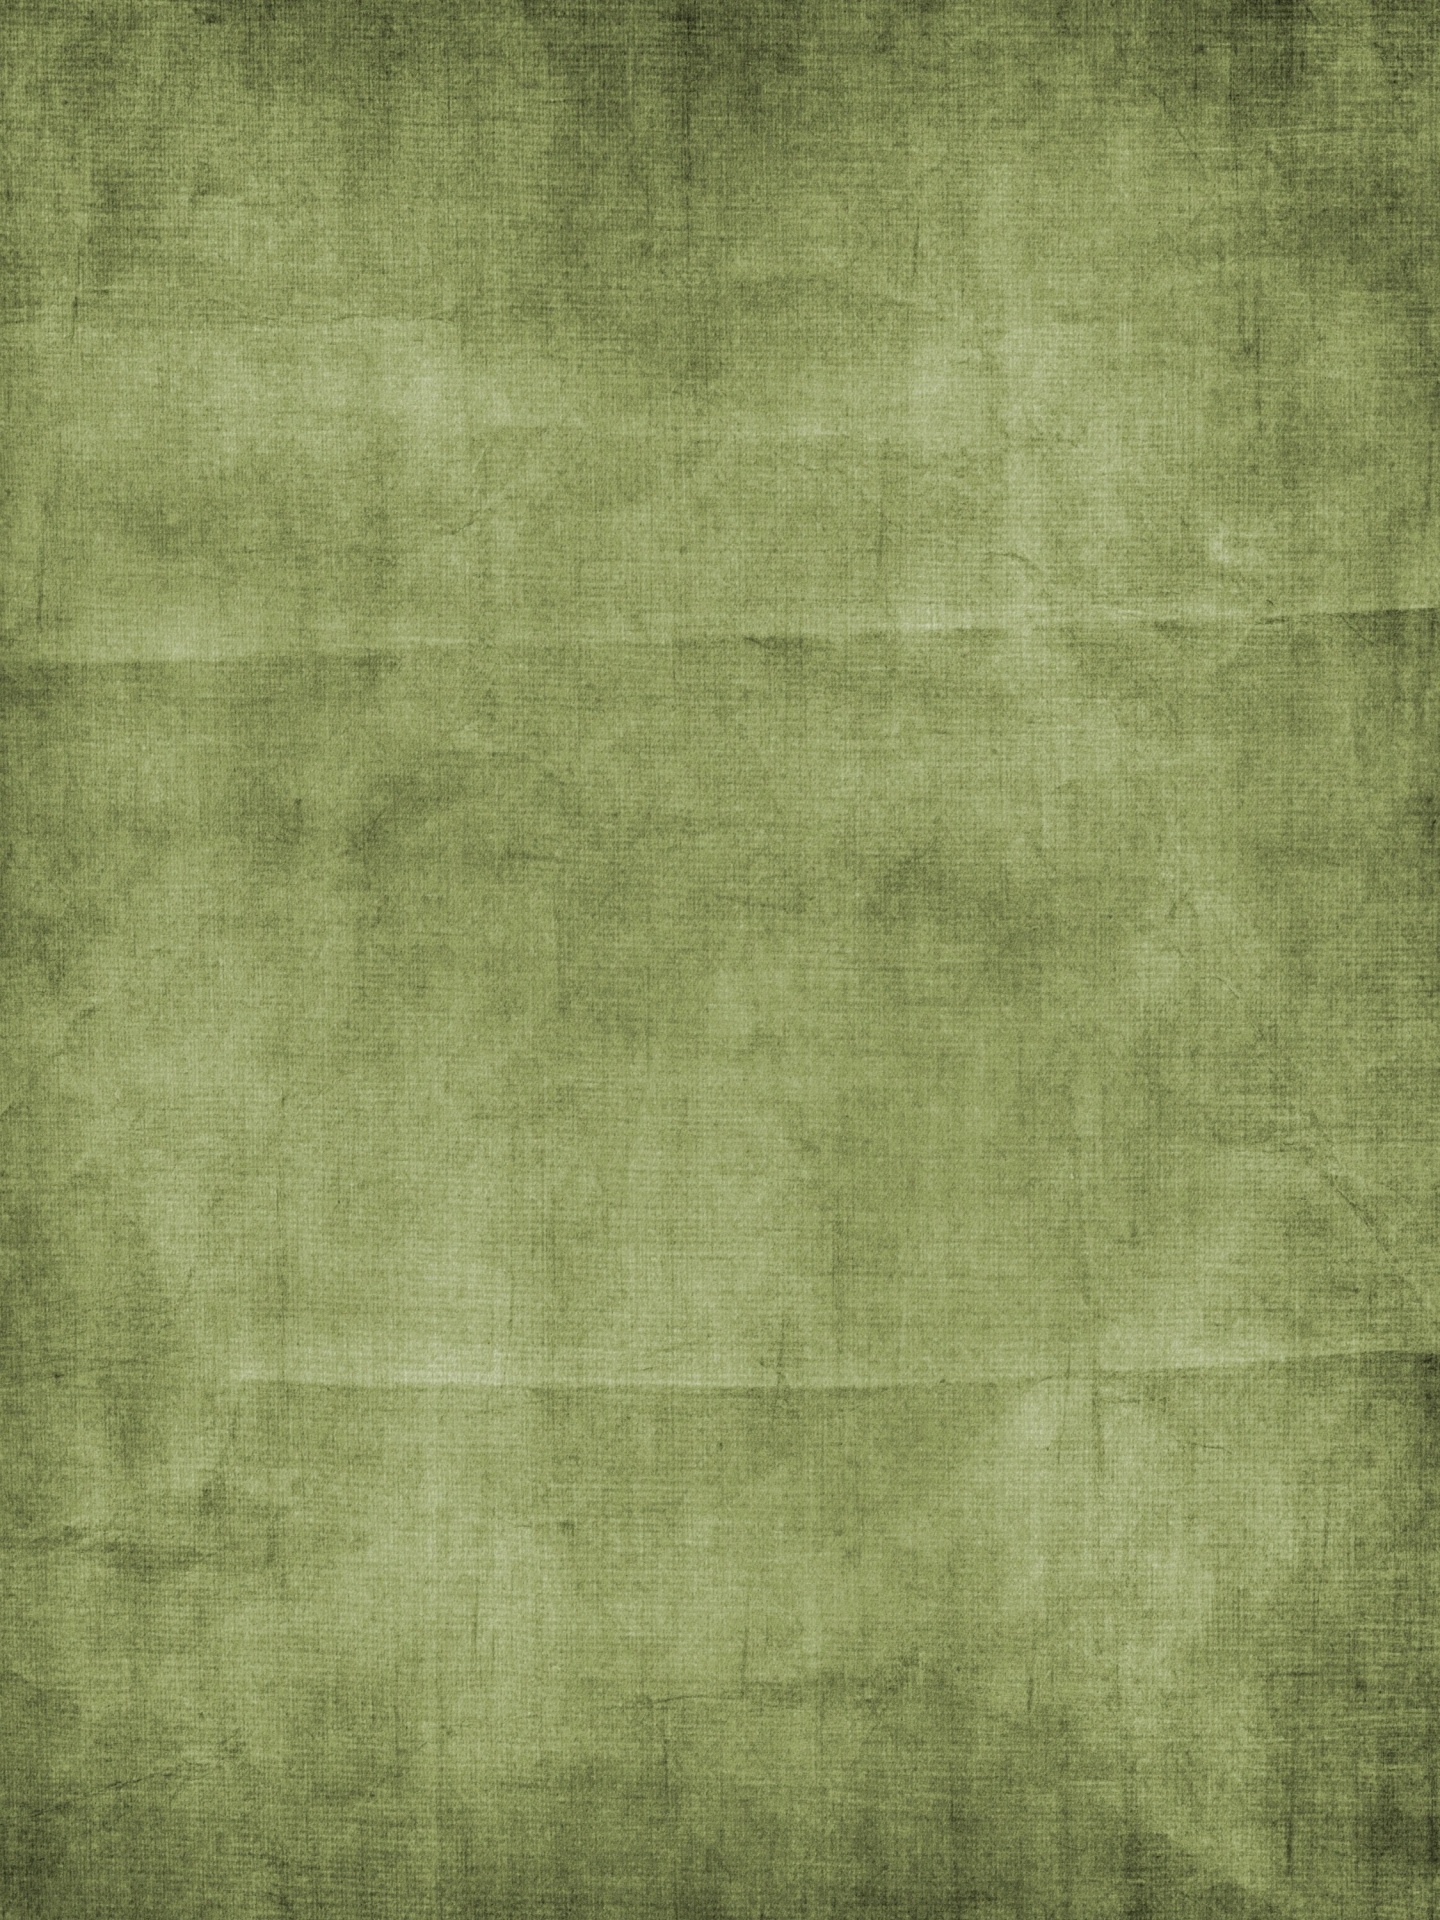 background green texture free photo